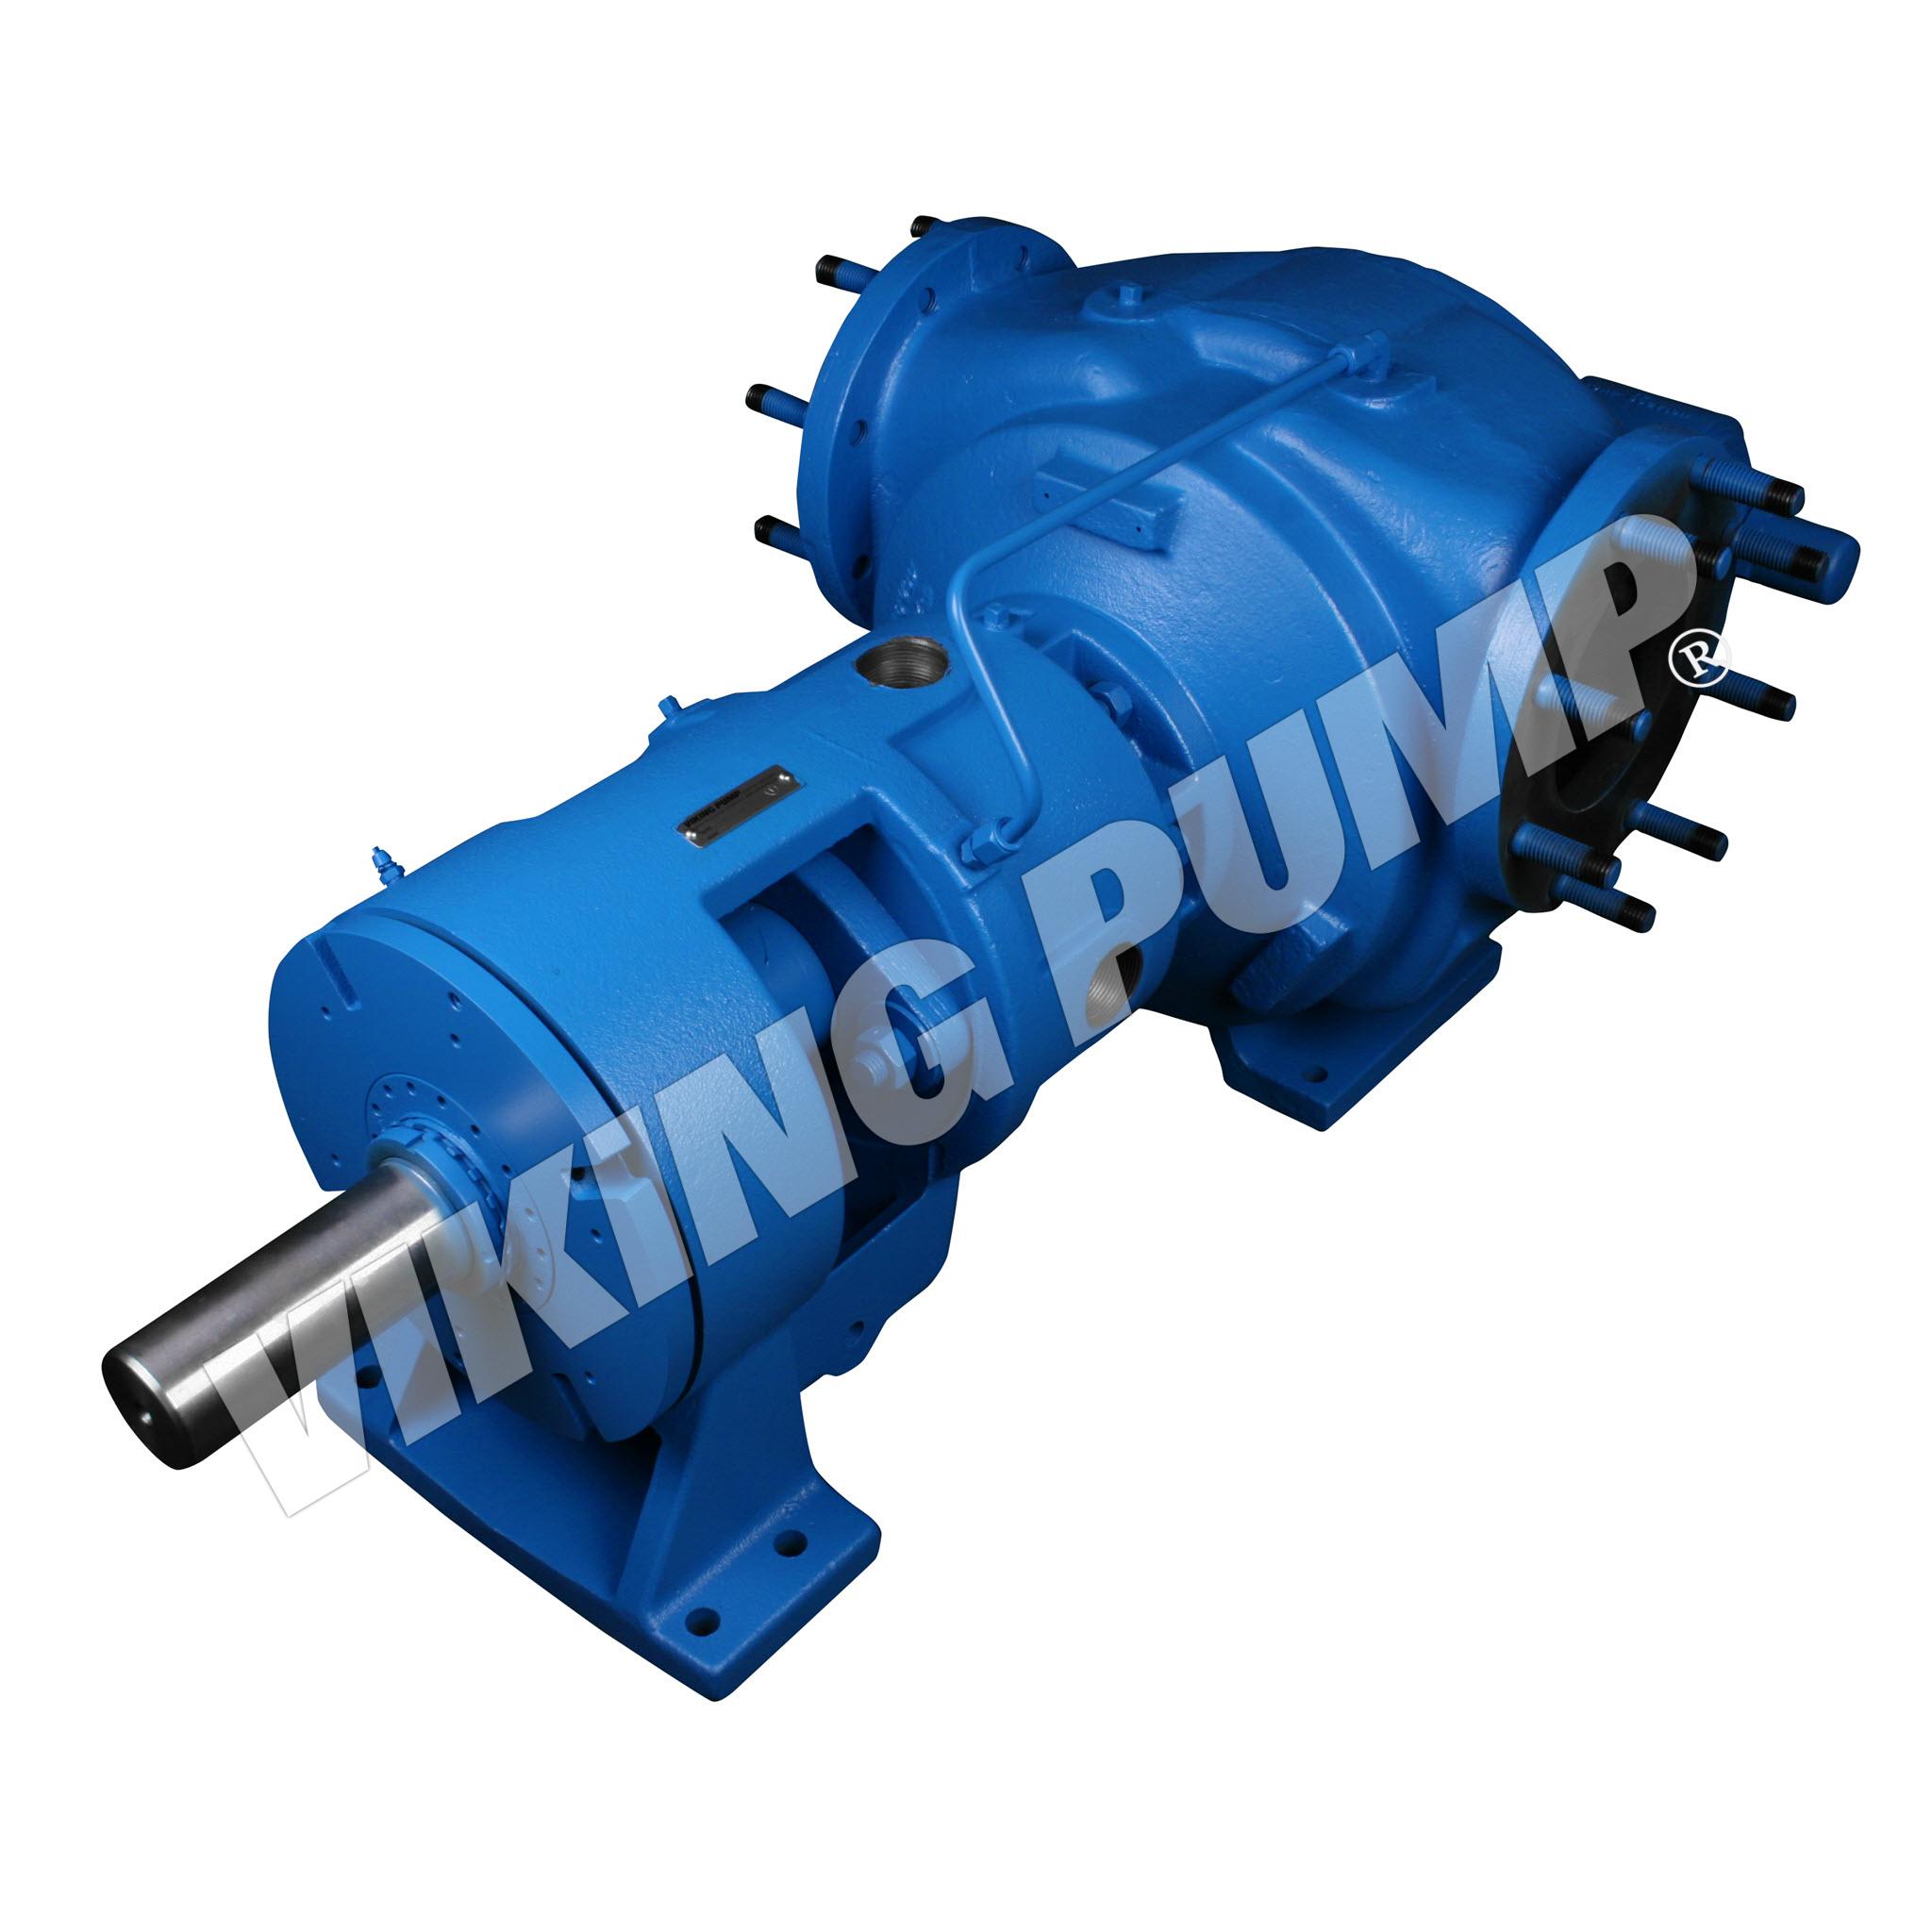 Model N4324A, Foot Mounted, Mechanical Seal, Relief Valve Pump